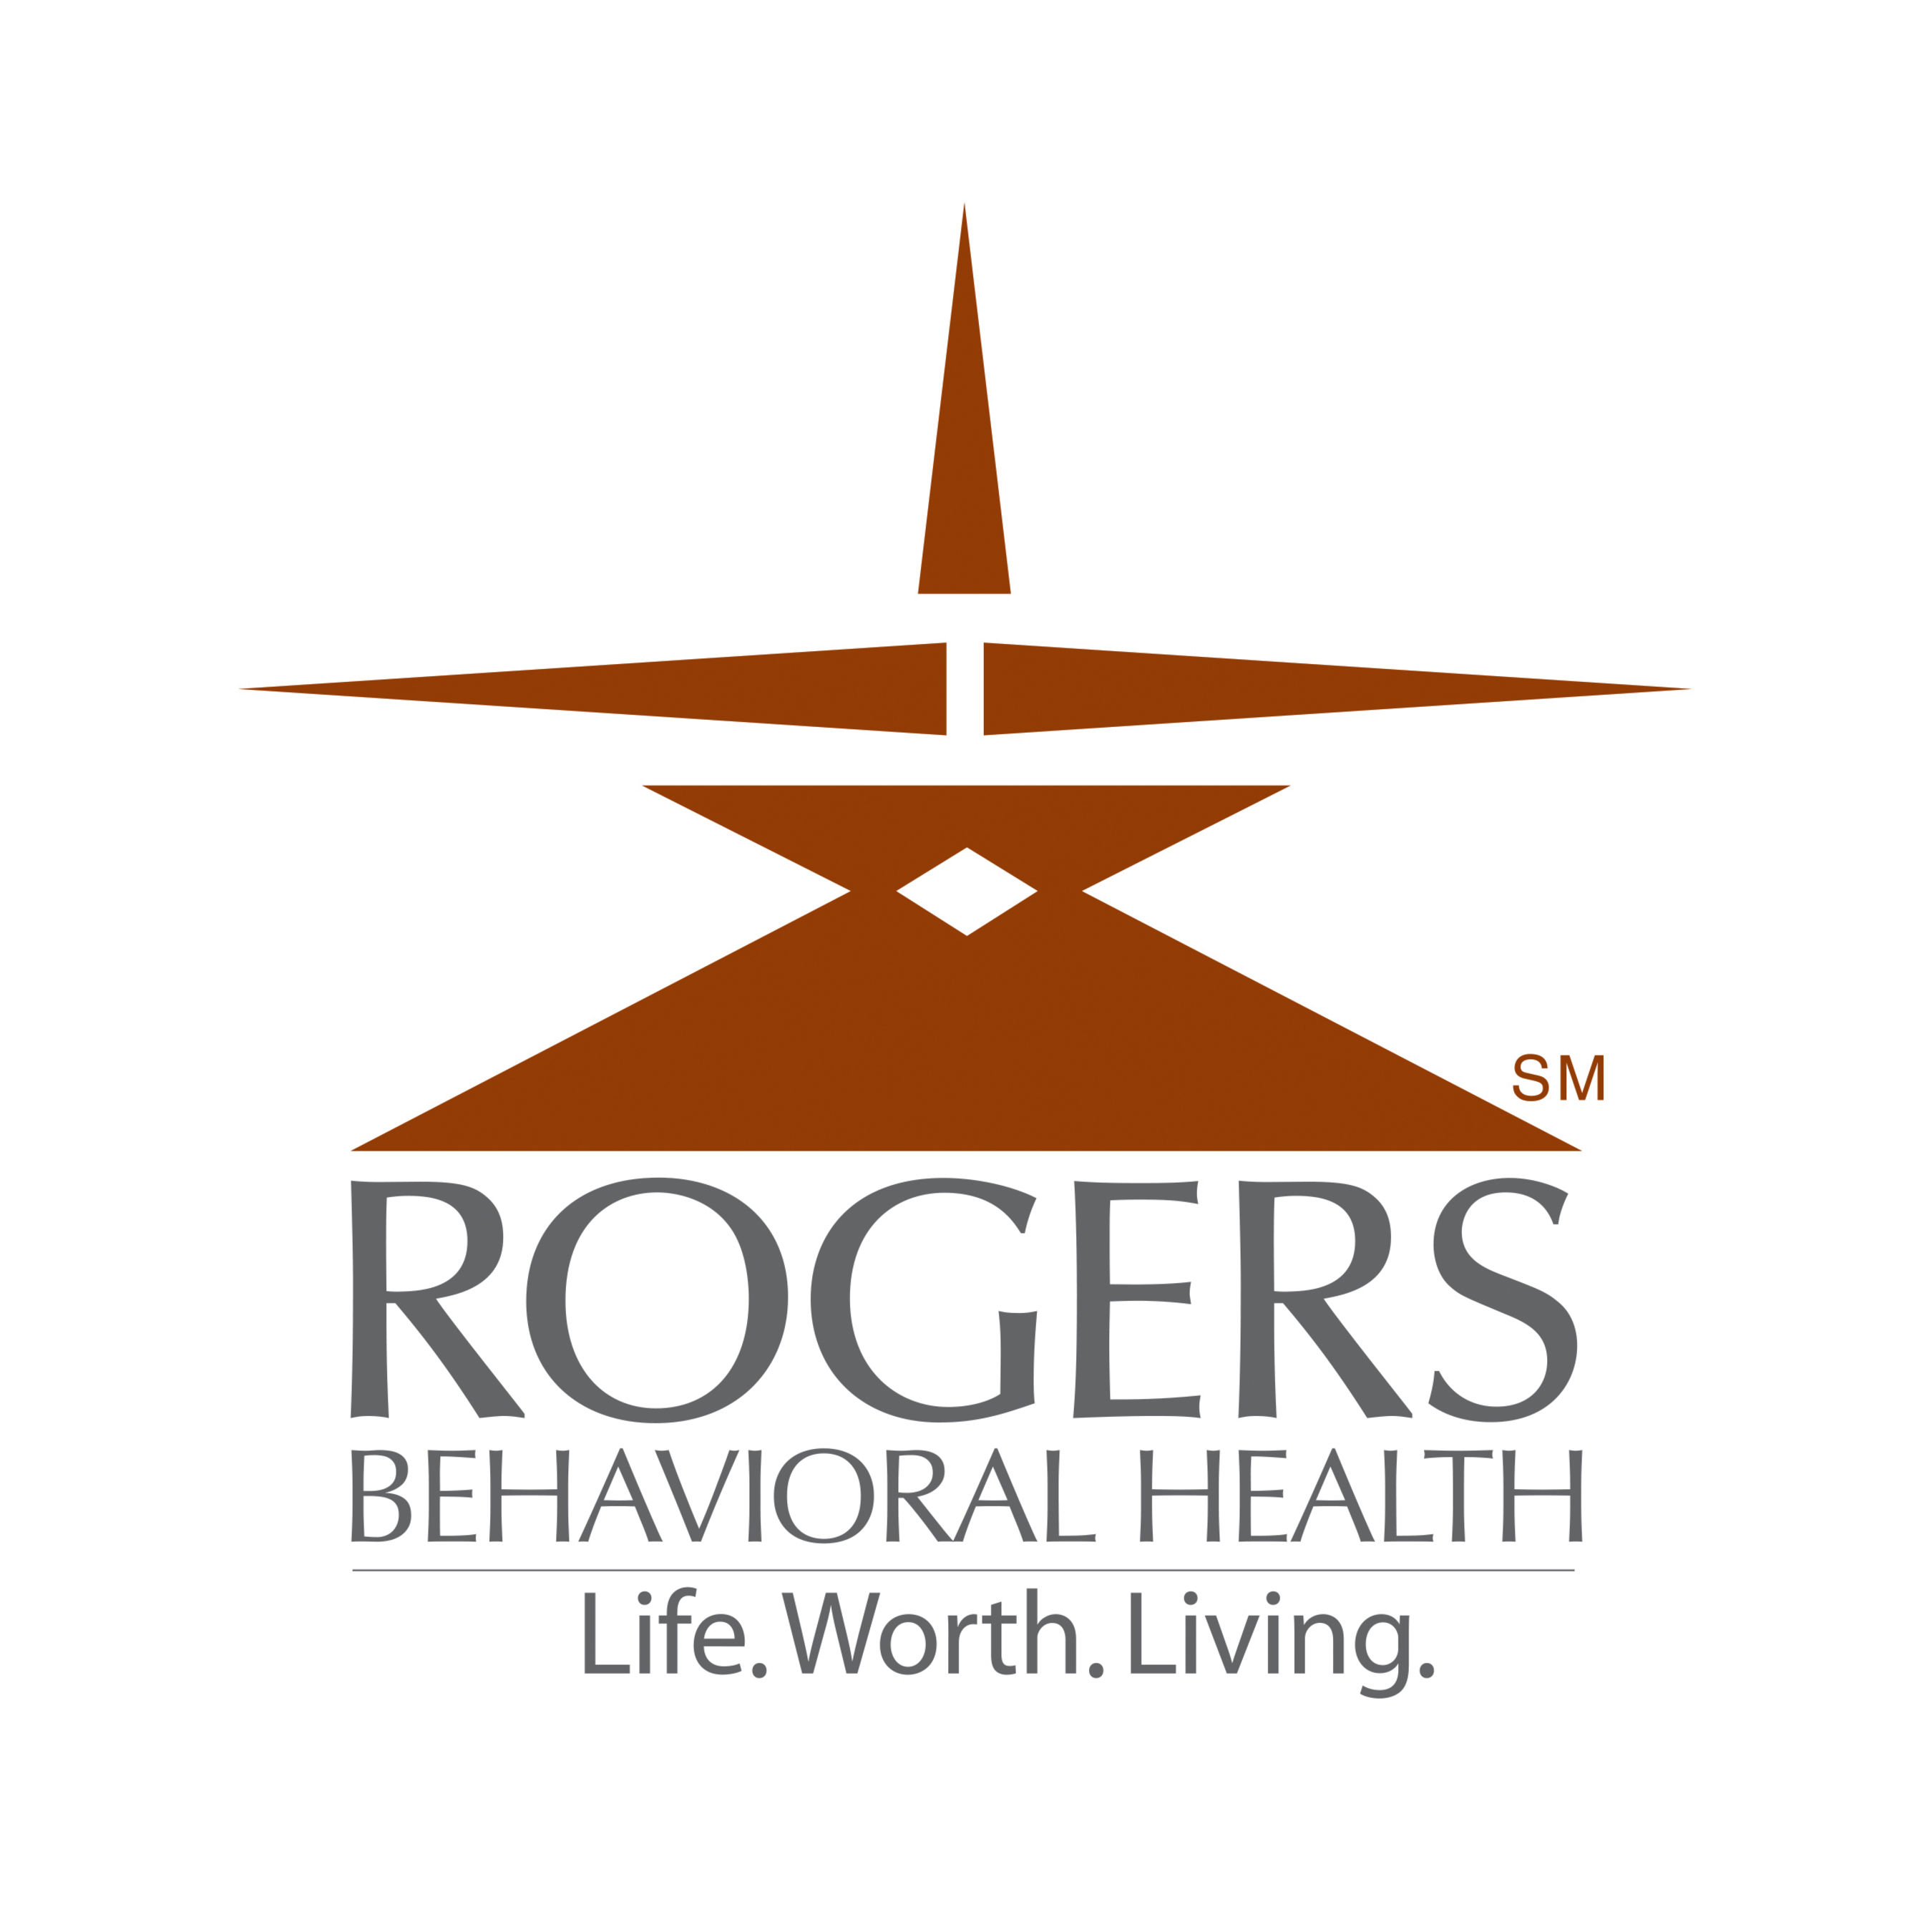 Wisconsin-based Rogers Behavioral Health System is a private, not-for-profit system nationally recognized for its specialized psychiatry and addiction services. Anchored by Rogers Memorial Hospital, Rogers offers multiple levels of evidence-based treatment for adults, children and adolescents with depression and mood disorders, eating disorders, addiction, obsessive-compulsive and anxiety disorders, and posttraumatic stress disorder in multiple locations. For more information, visit www.rogershospital.org.